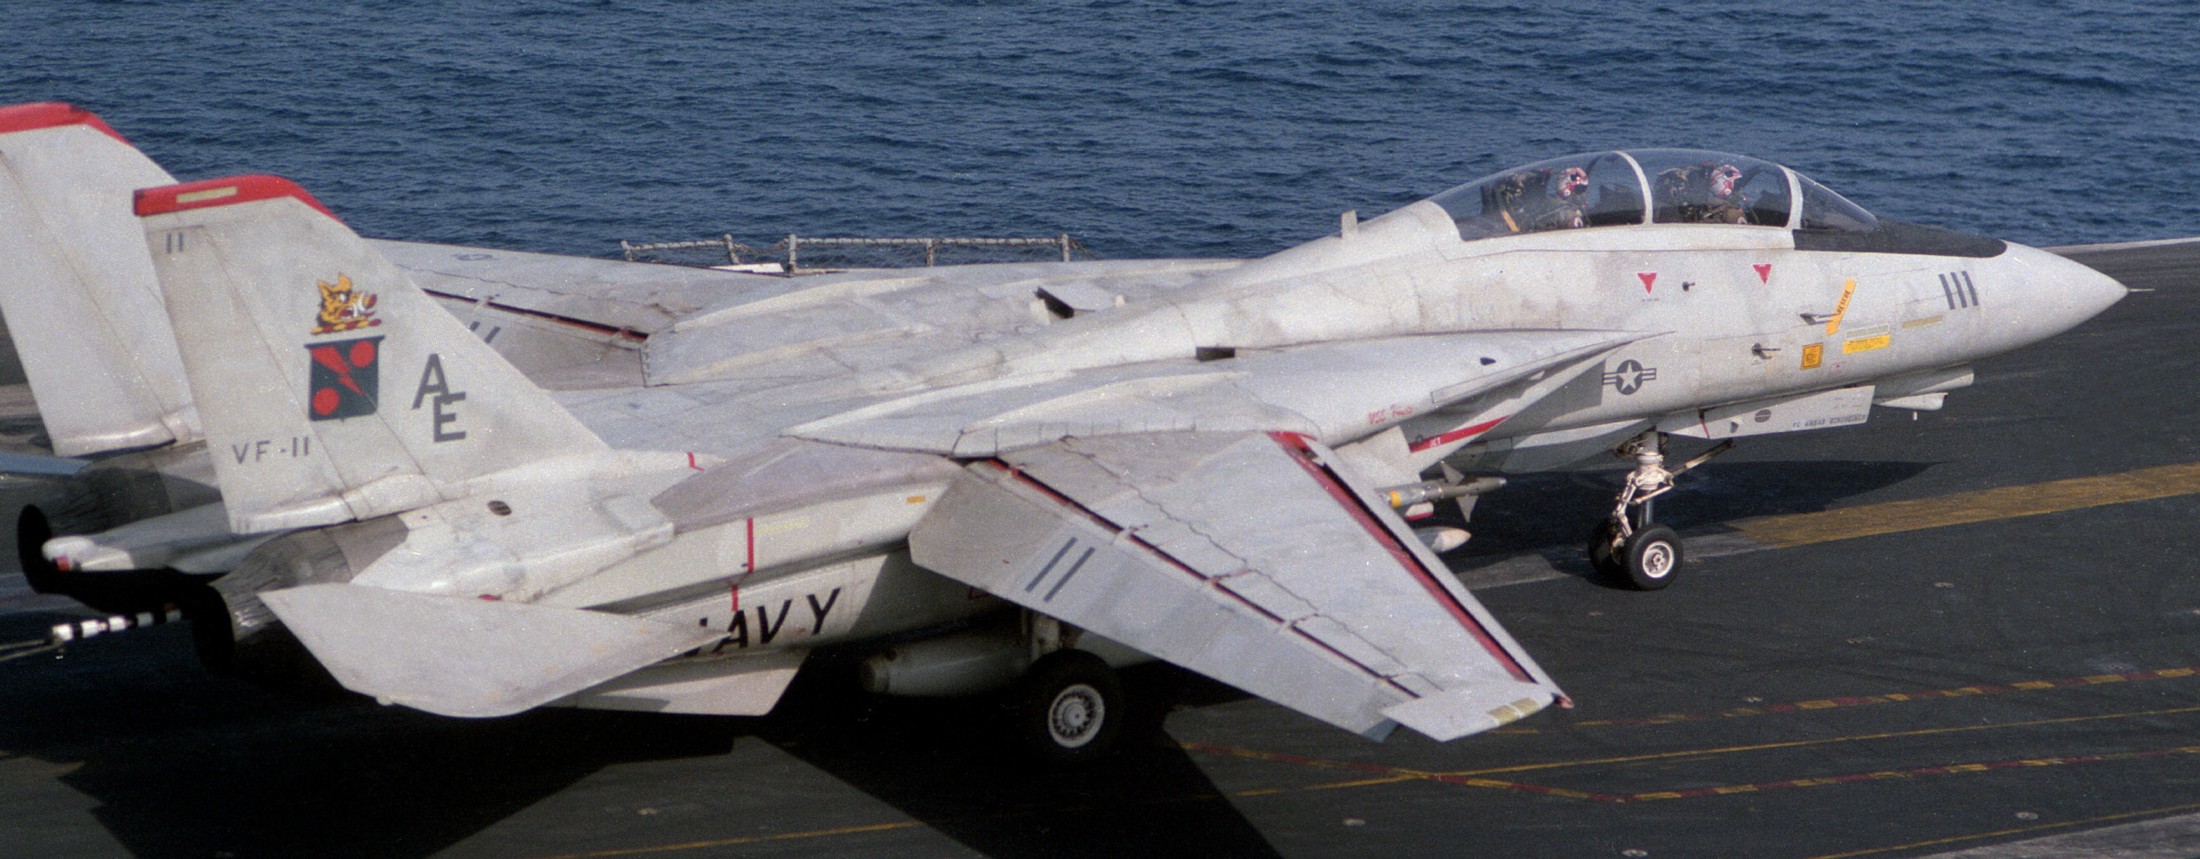 vf-11 red rippers fighter squadron us navy fitron f-14a tomcat carrier air wing cvw-6 uss forrestal cv-59 03